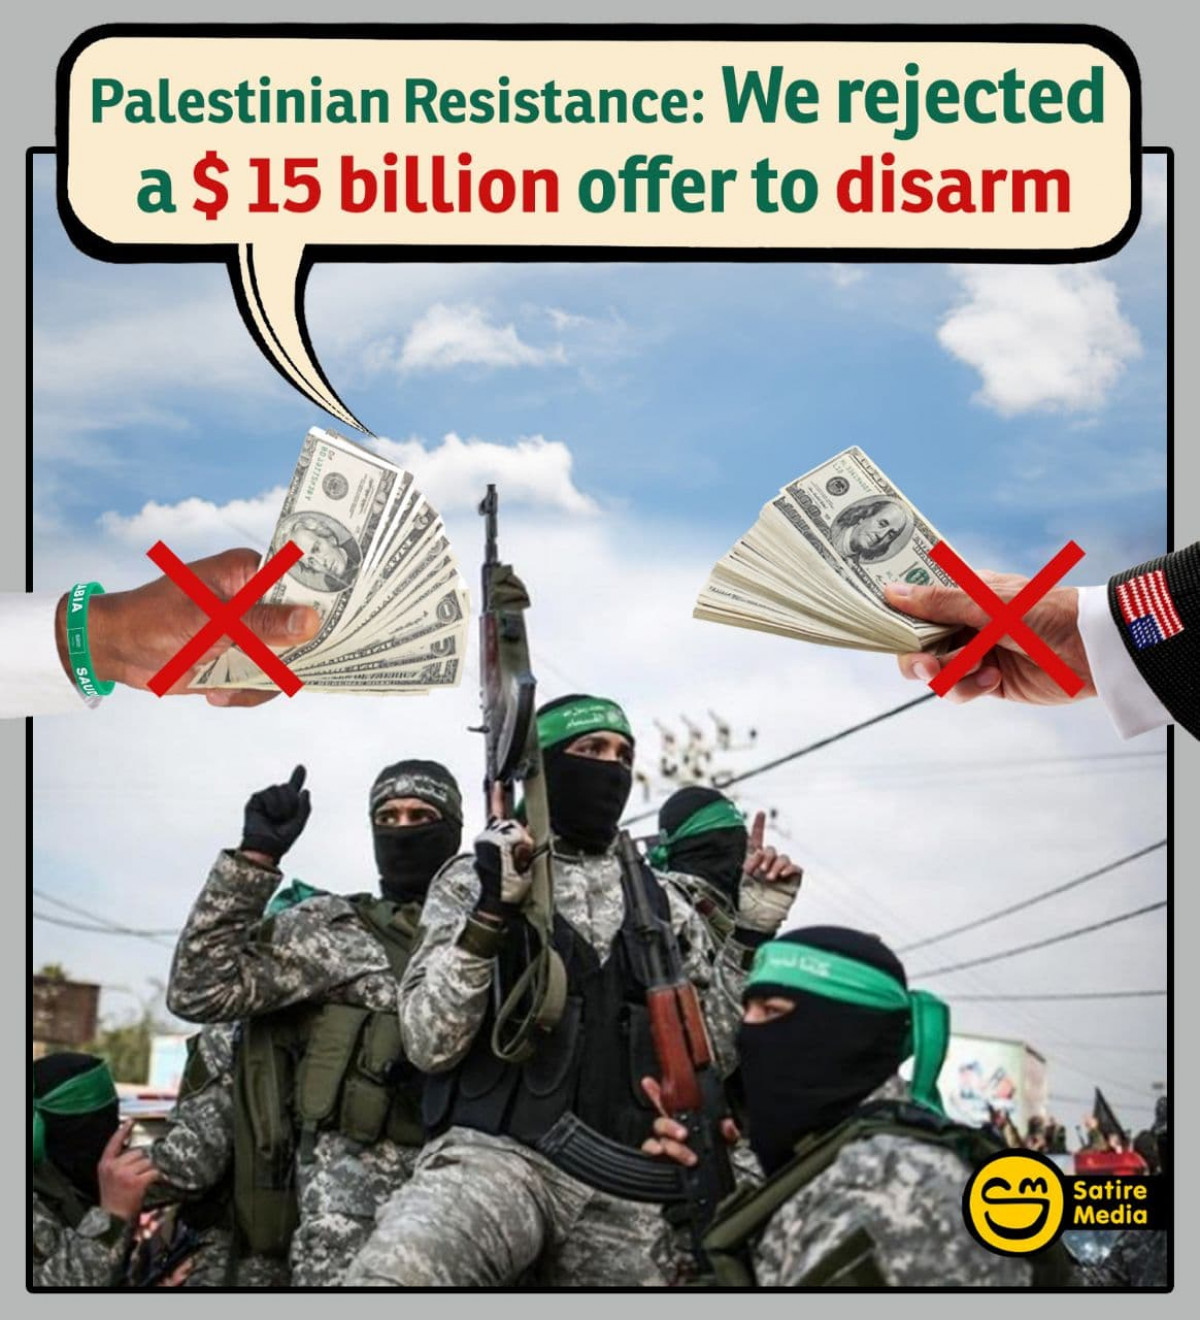 Palestinian Resistance: We rejected a $ 15 billion offer to disarm